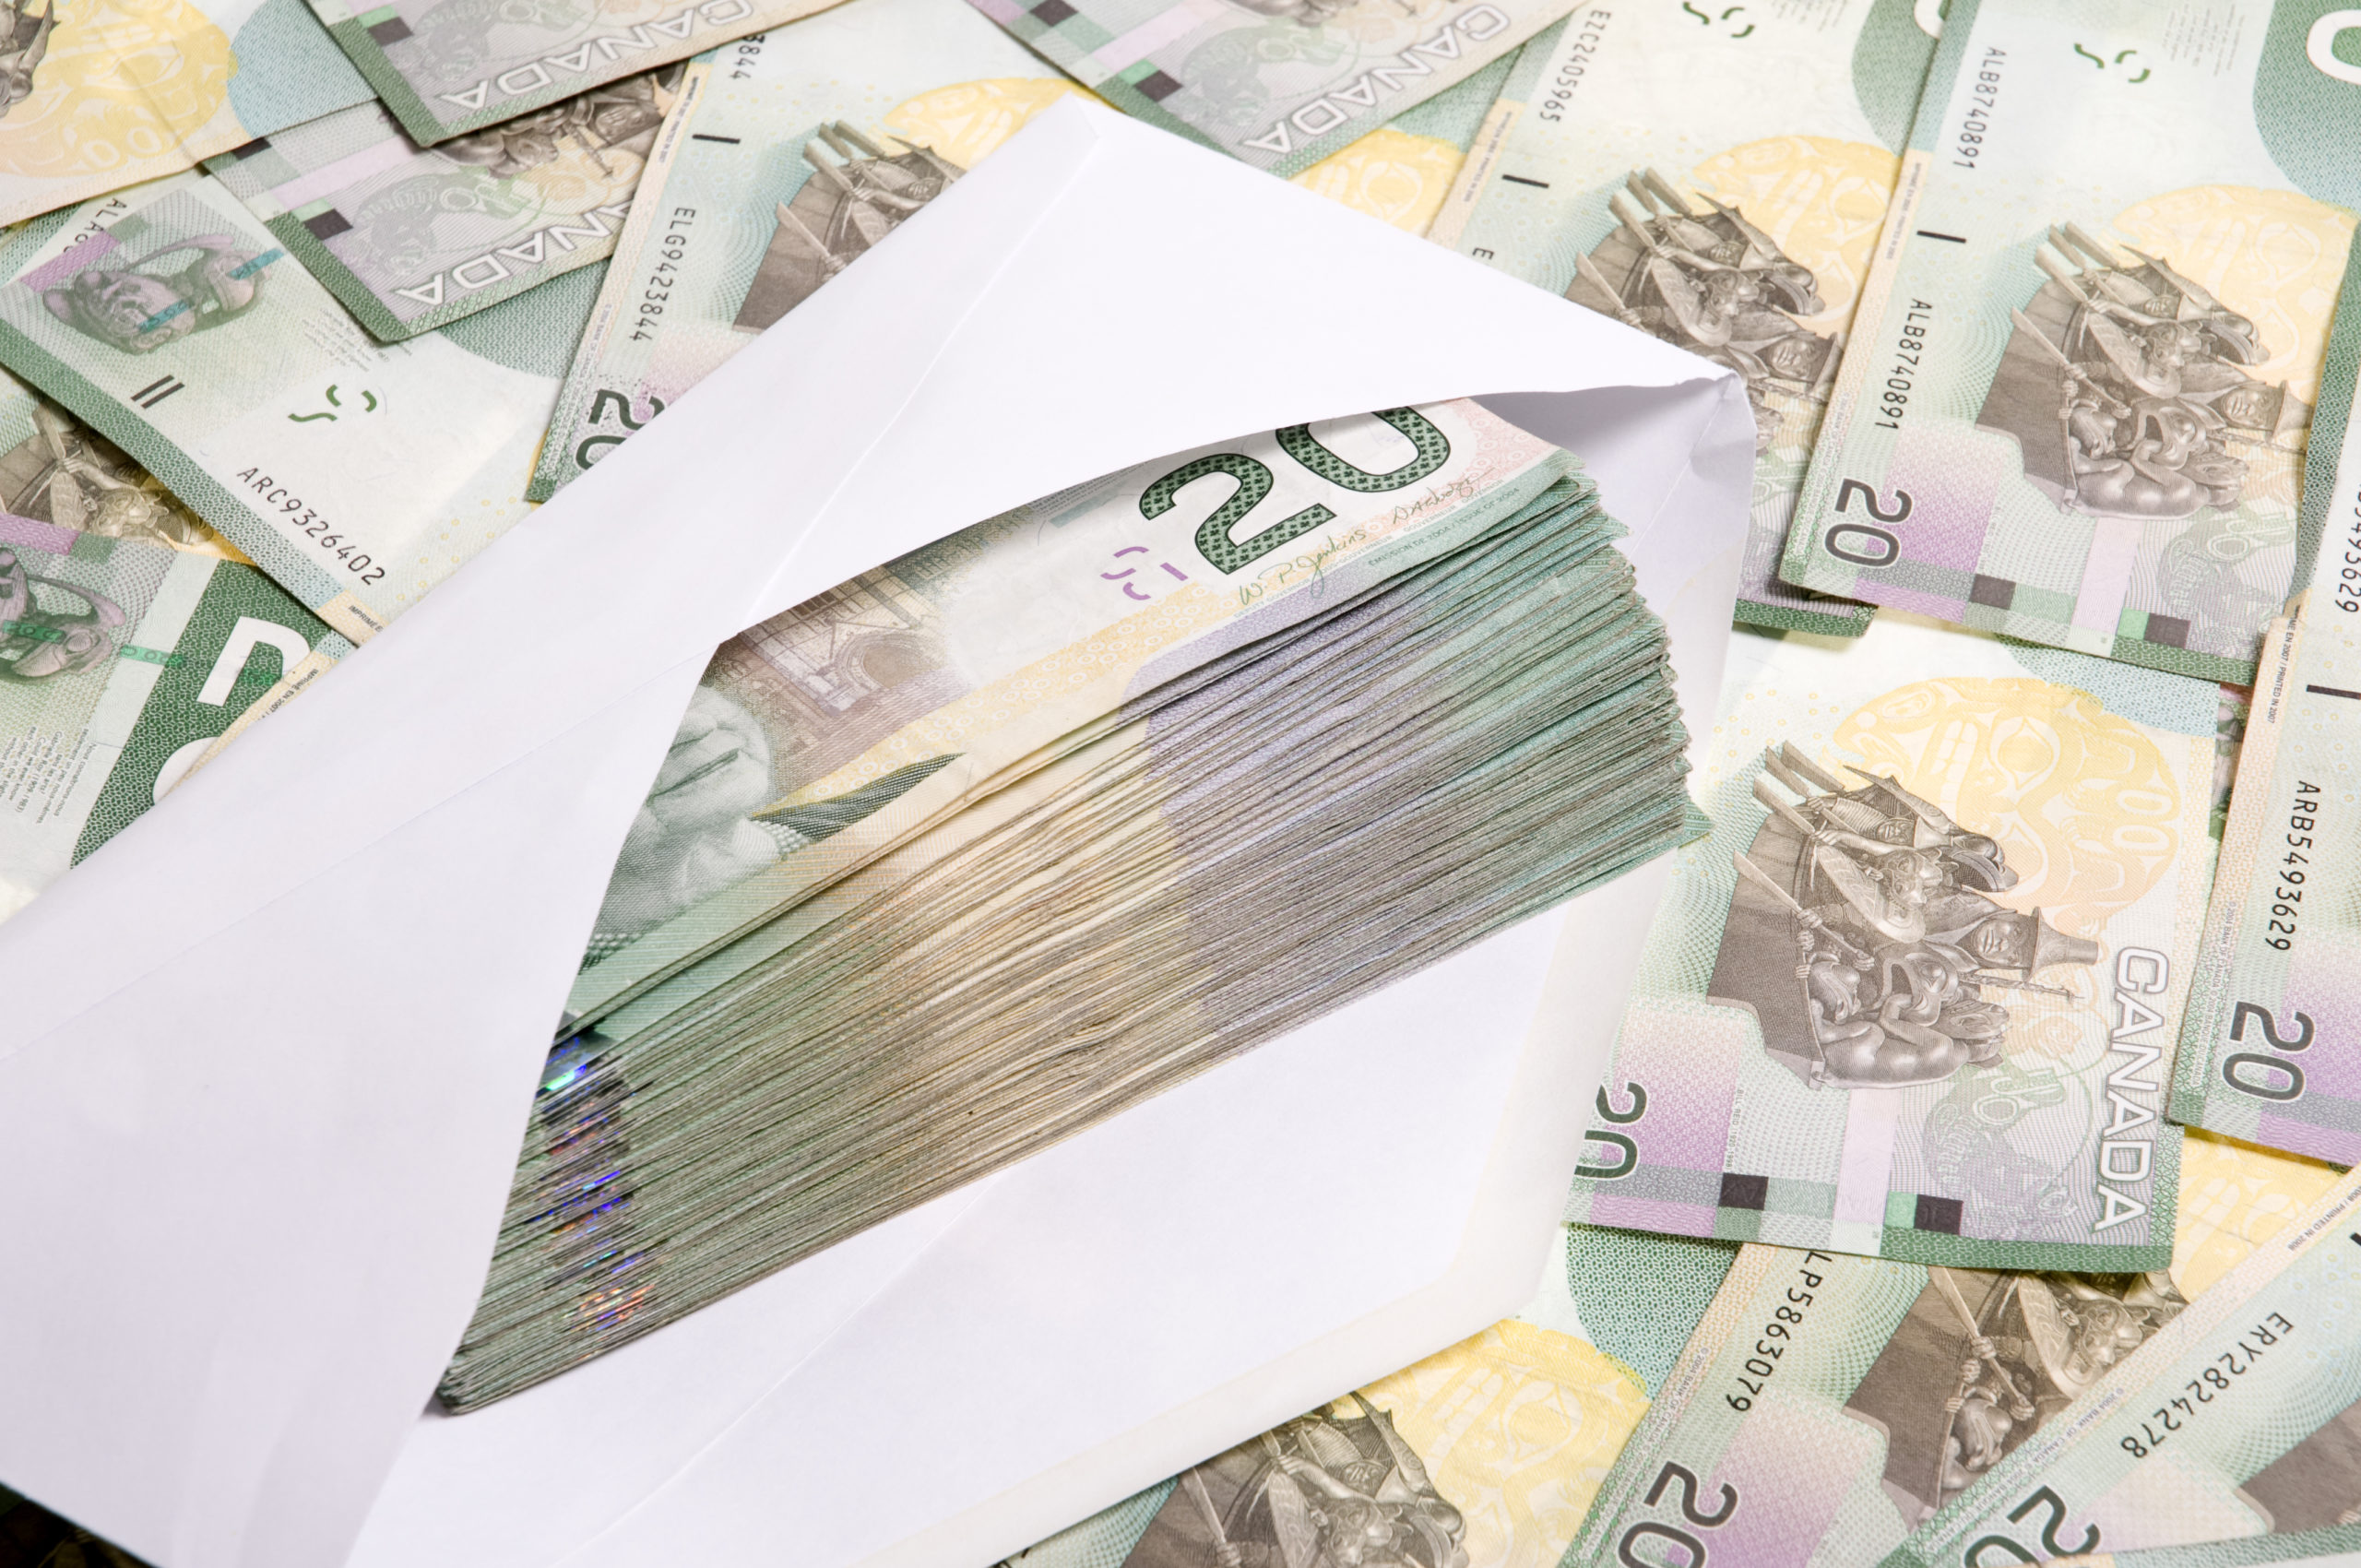 This year, government debt will cost each NB taxpayer $1,400.

